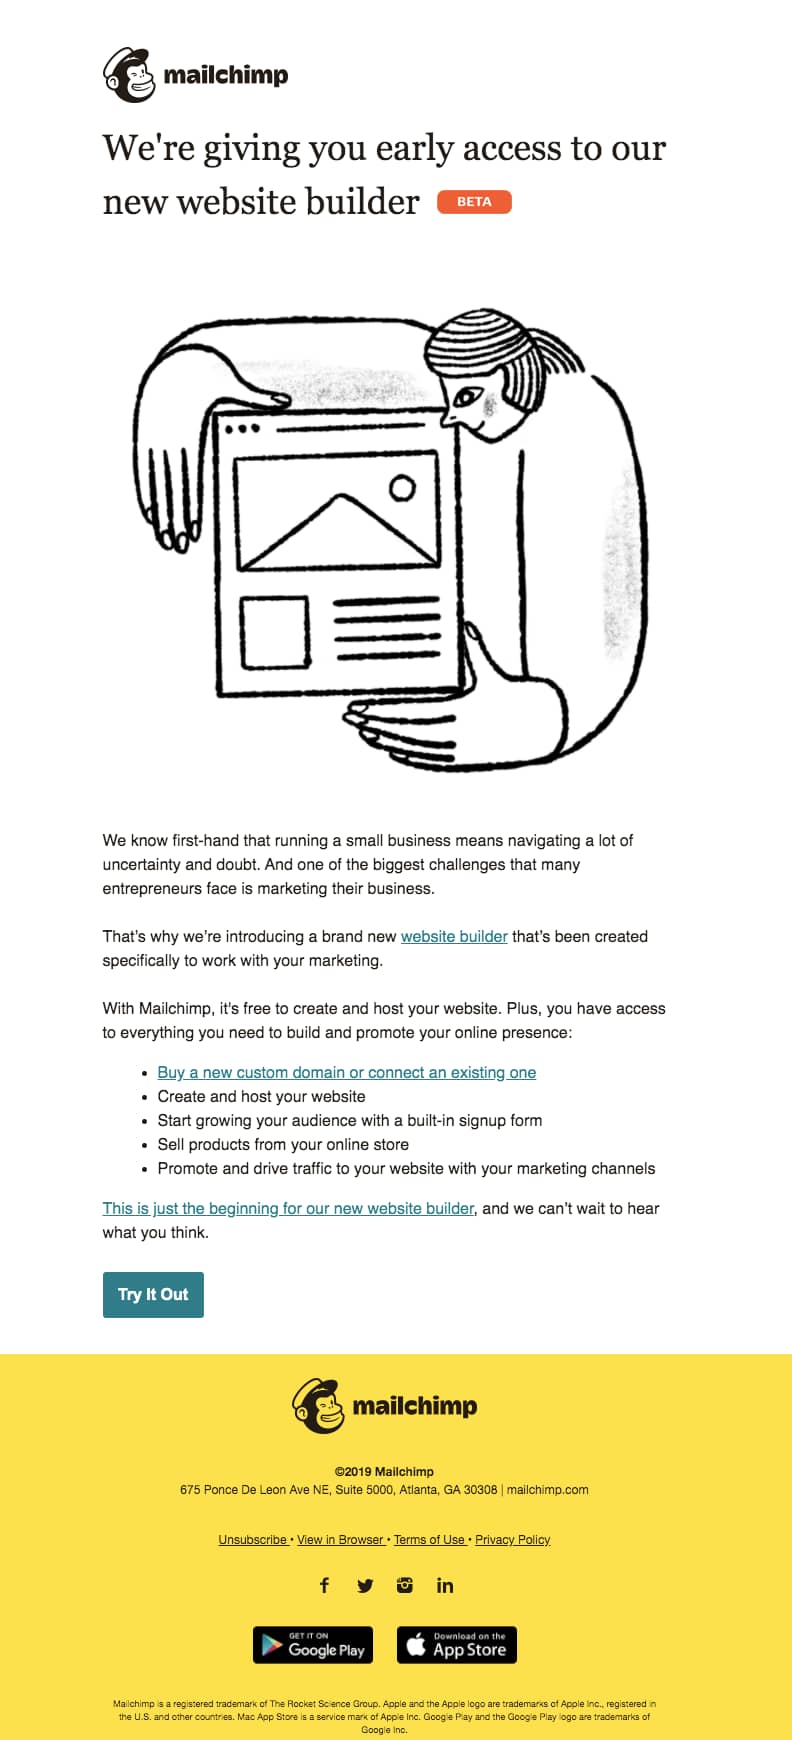 SaaS Product Launch Emails: Screenshot of Mailchimp's launch email